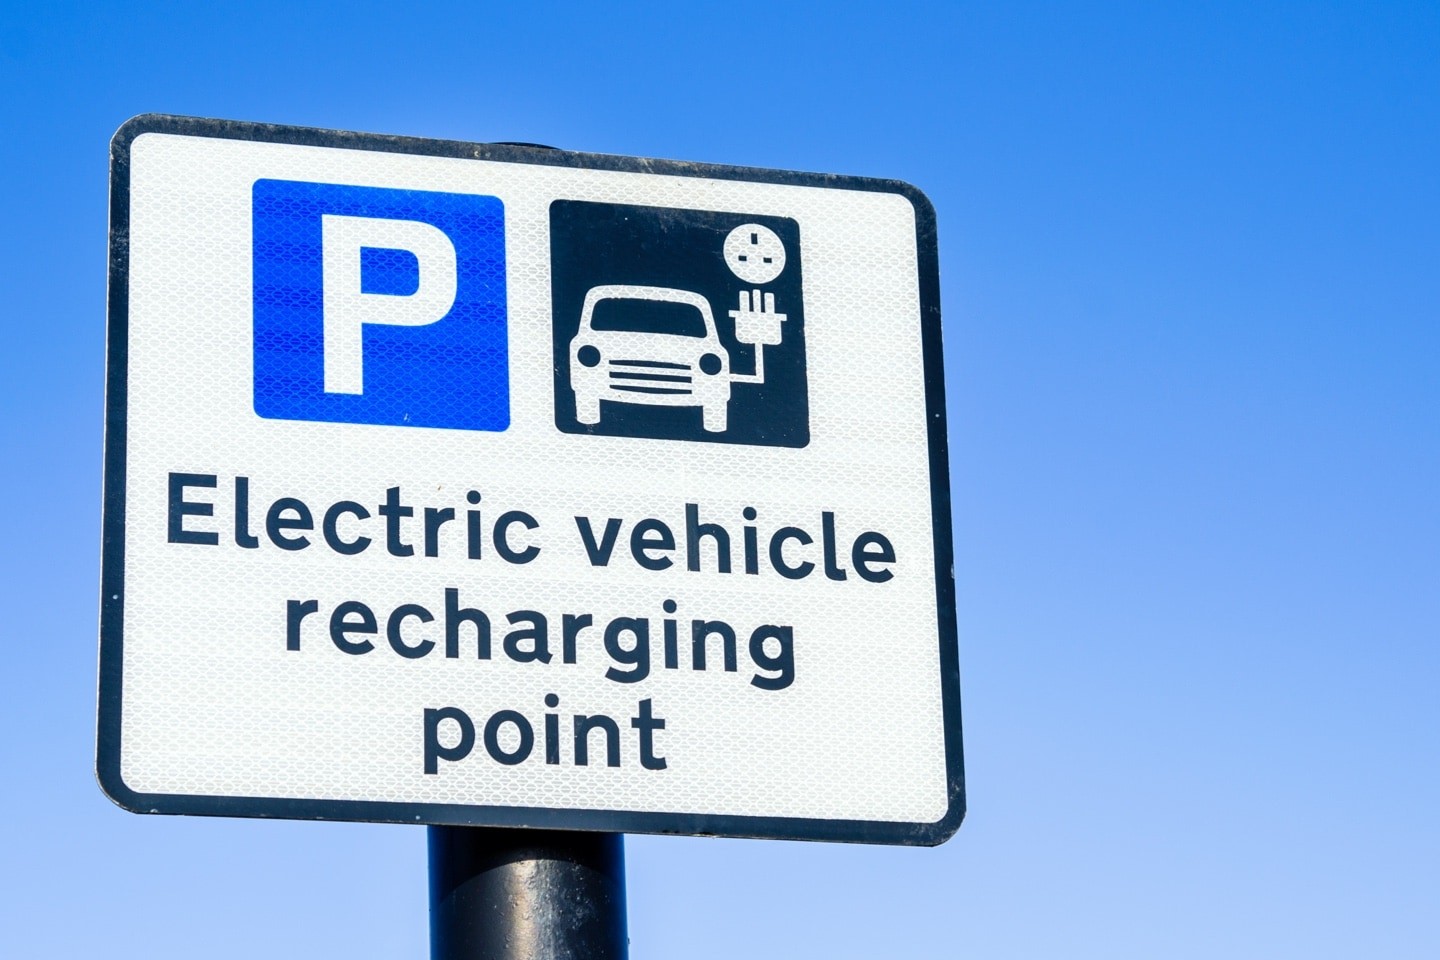 EV charging infrastructure is important if we’re to support the adoption of electric vehicles. However, there’s a lot more we can do to allay drivers’ concerns.